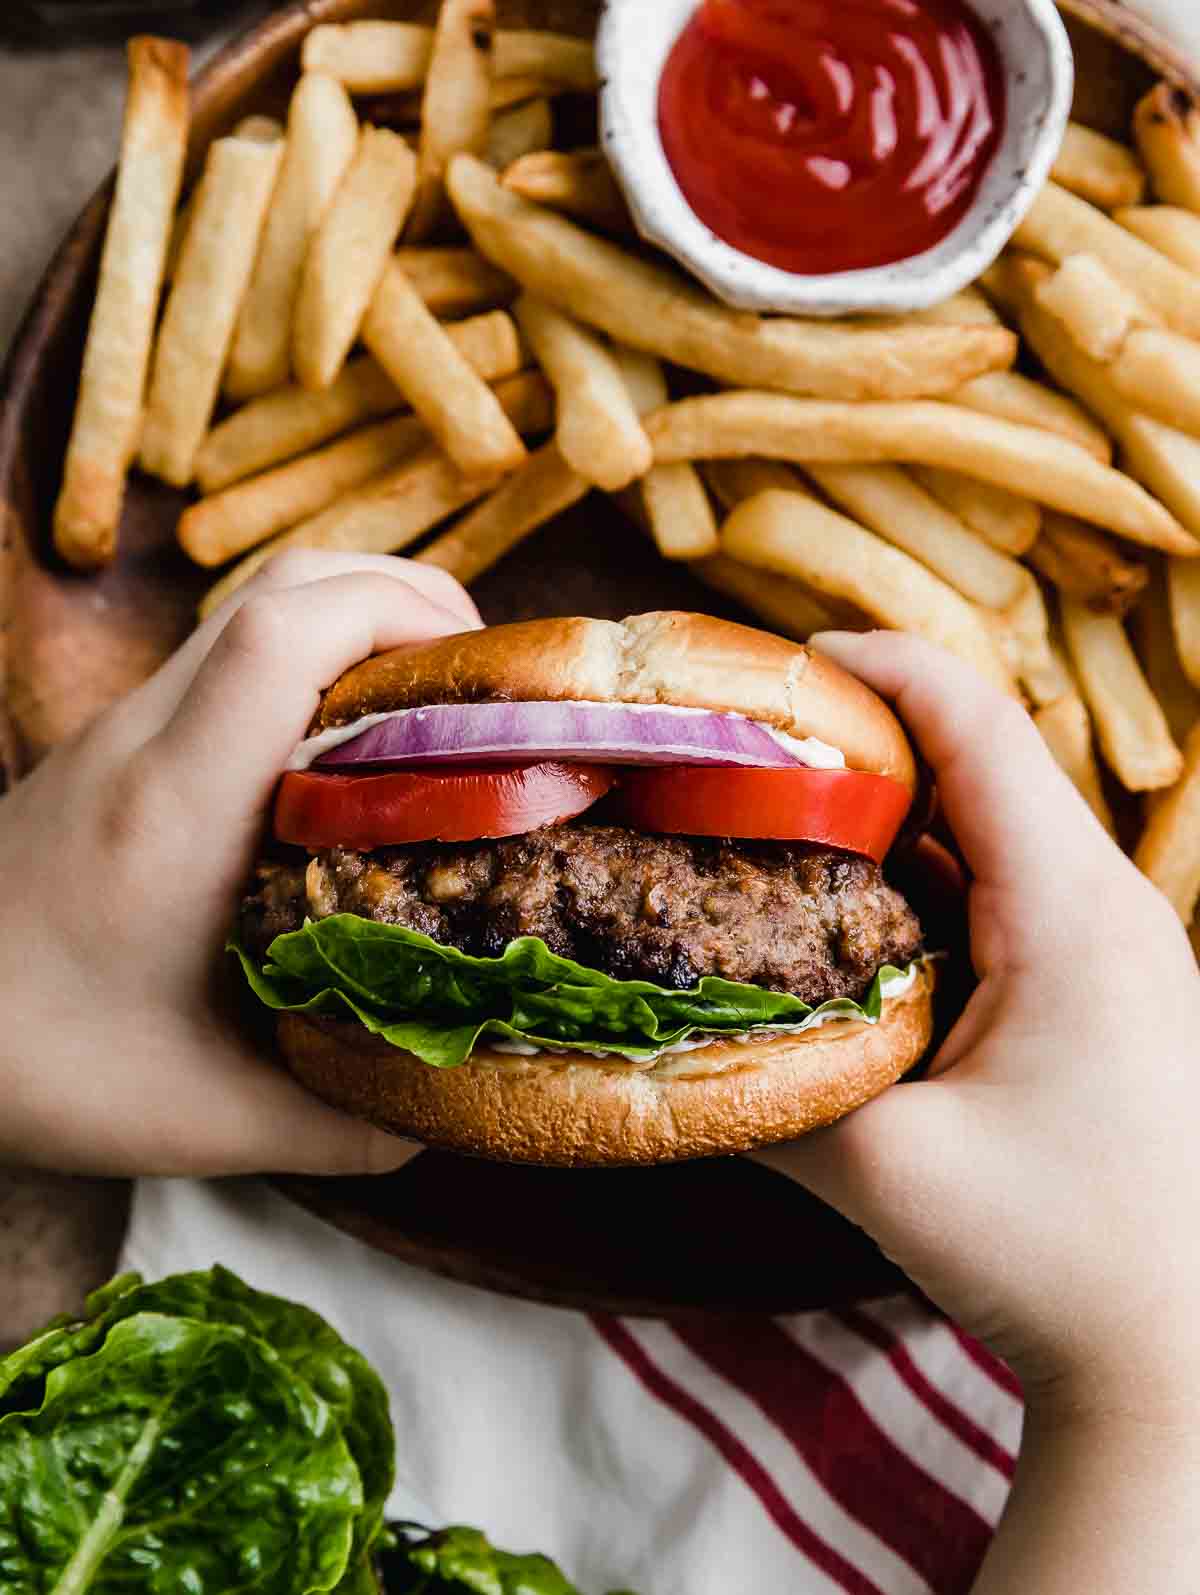 Two hands holding a Steakhouse Burger on a bun with lettuce, tomato, and purple onion, with French fries in the background.